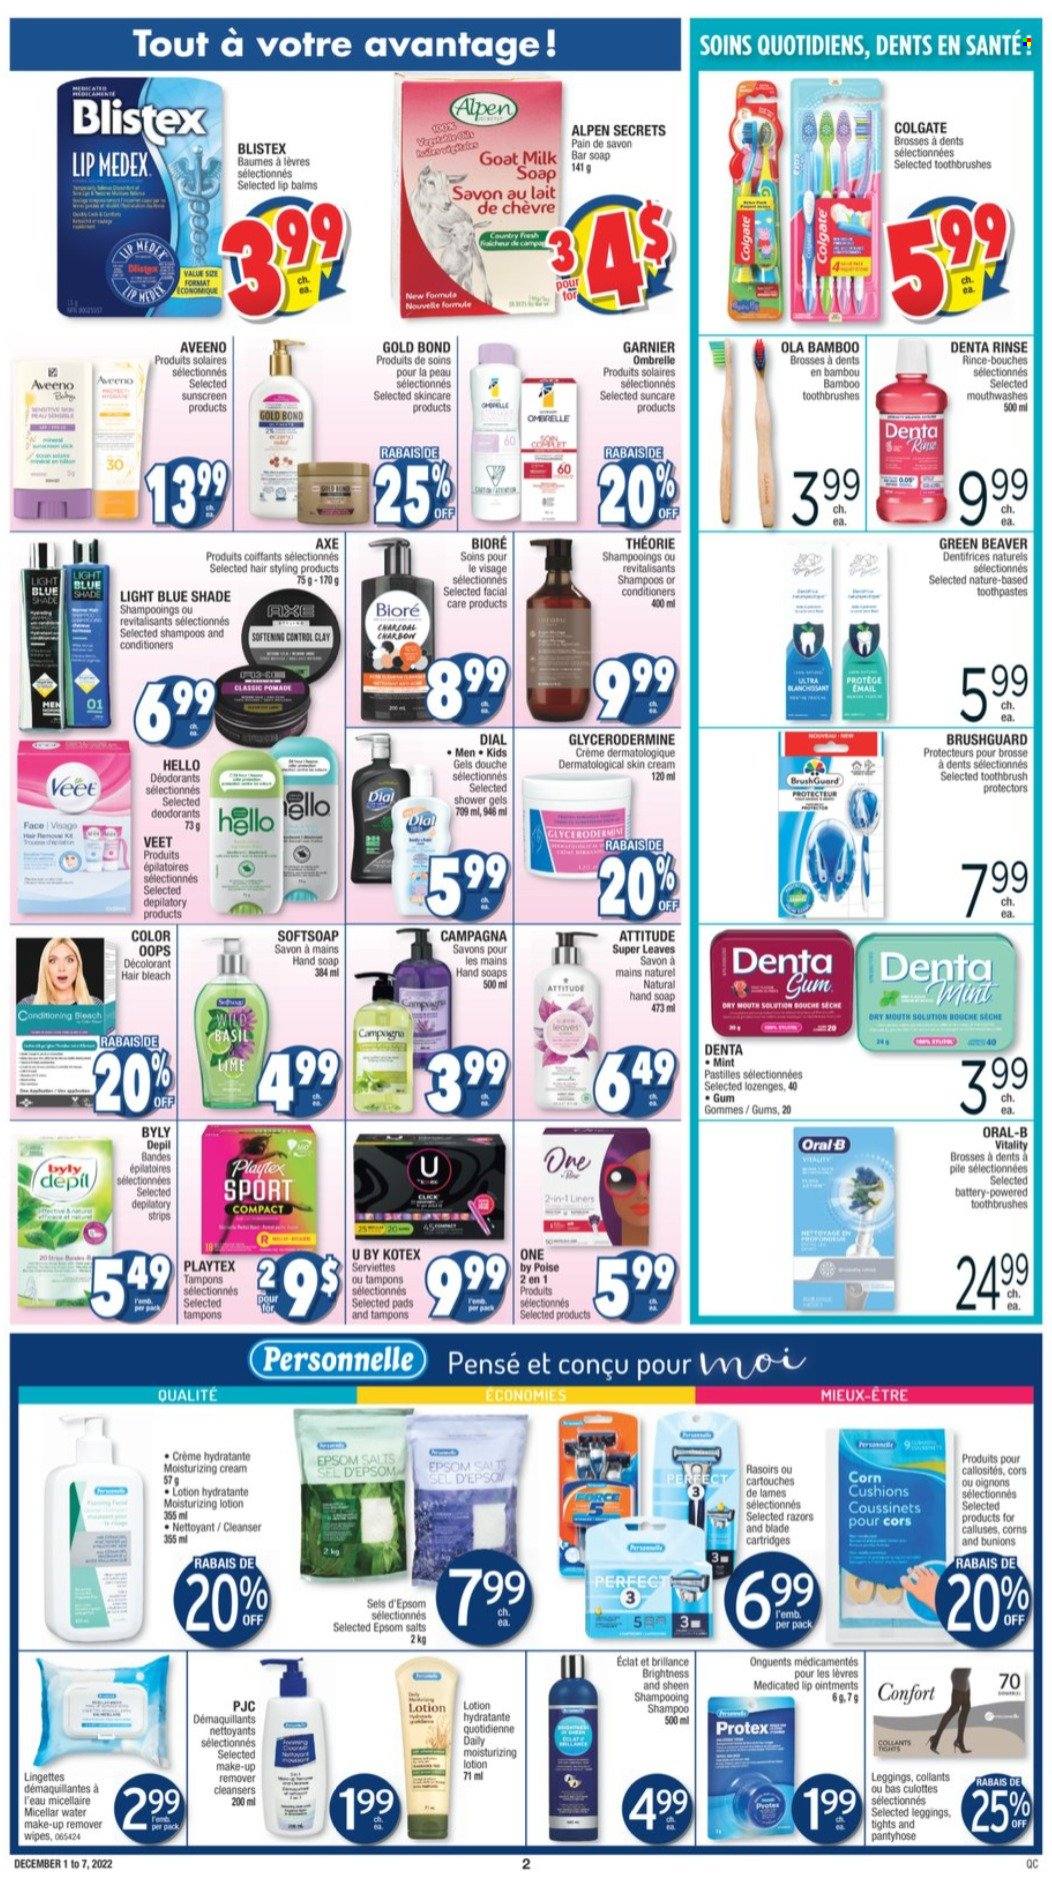 thumbnail - Jean Coutu Flyer - December 01, 2022 - December 07, 2022 - Sales products - pastilles, corn, wipes, Aveeno, bleach, Softsoap, hand soap, Protex, soap bar, Dial, soap, toothbrush, Playtex, Kotex, tampons, cleanser, micellar water, Bioré®, body lotion, Eclat, Axe, Veet, makeup, cushion, leggings, tights, pantyhose, Colgate, Garnier, shampoo, Oral-B, deodorant. Page 2.